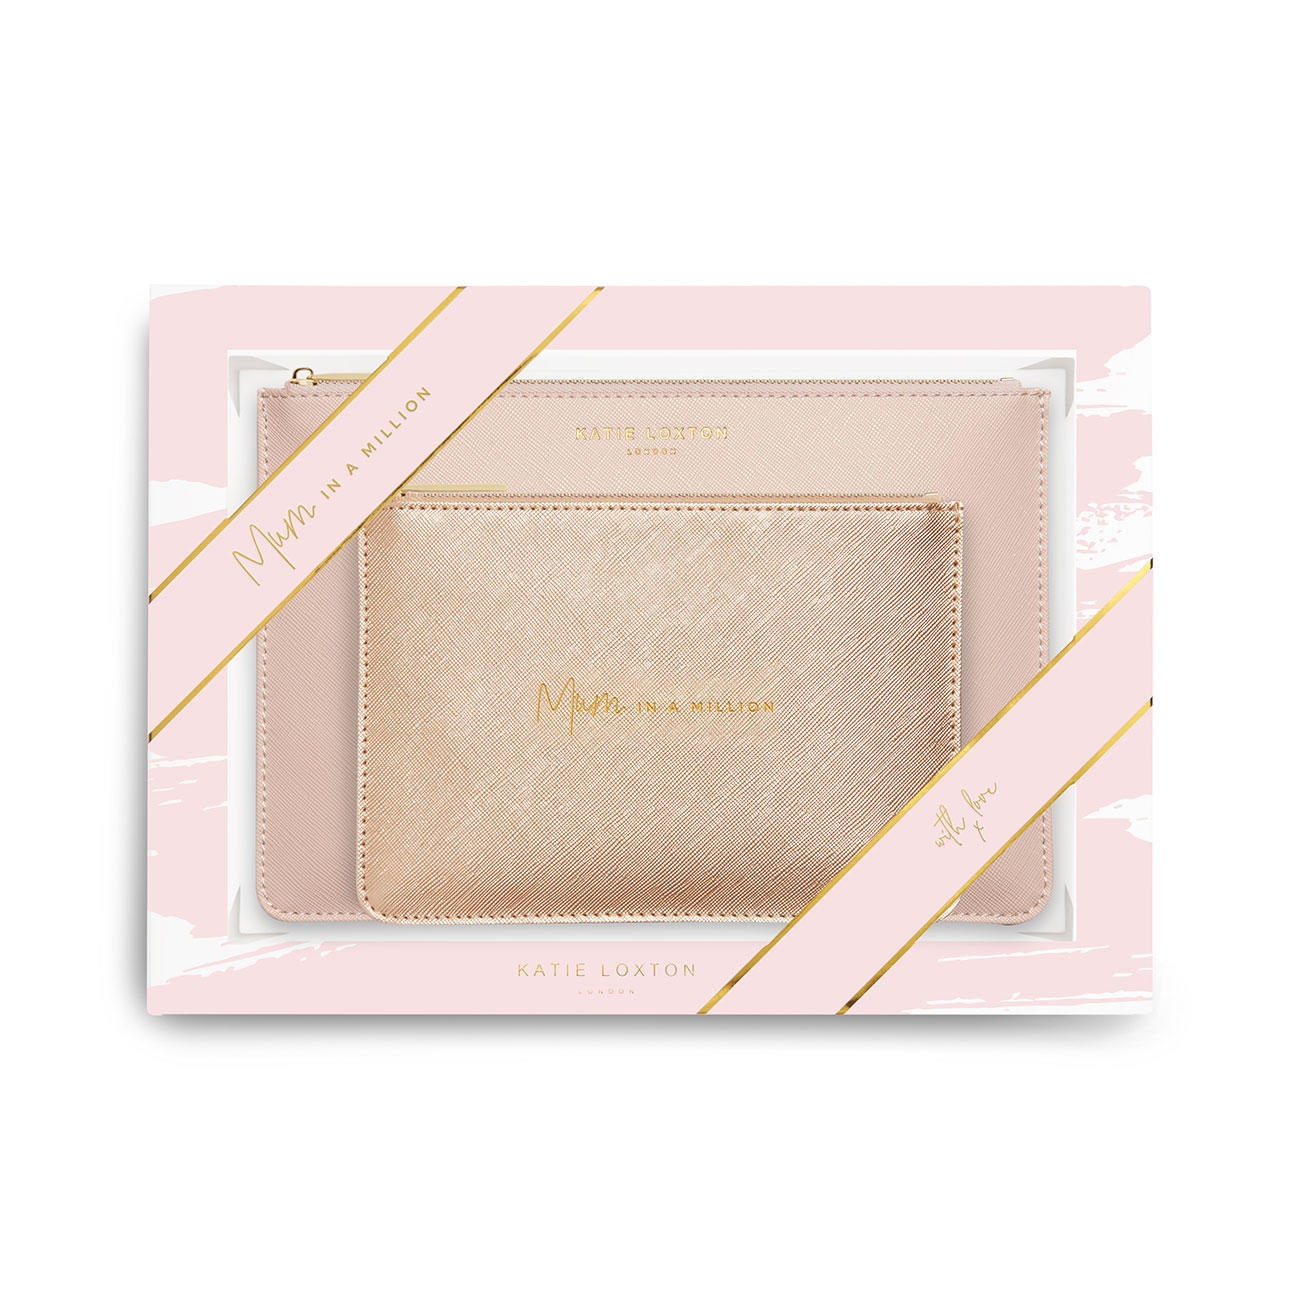 Katie Loxton Perfect Pouch Gift Set – Mum In A Million – Pink